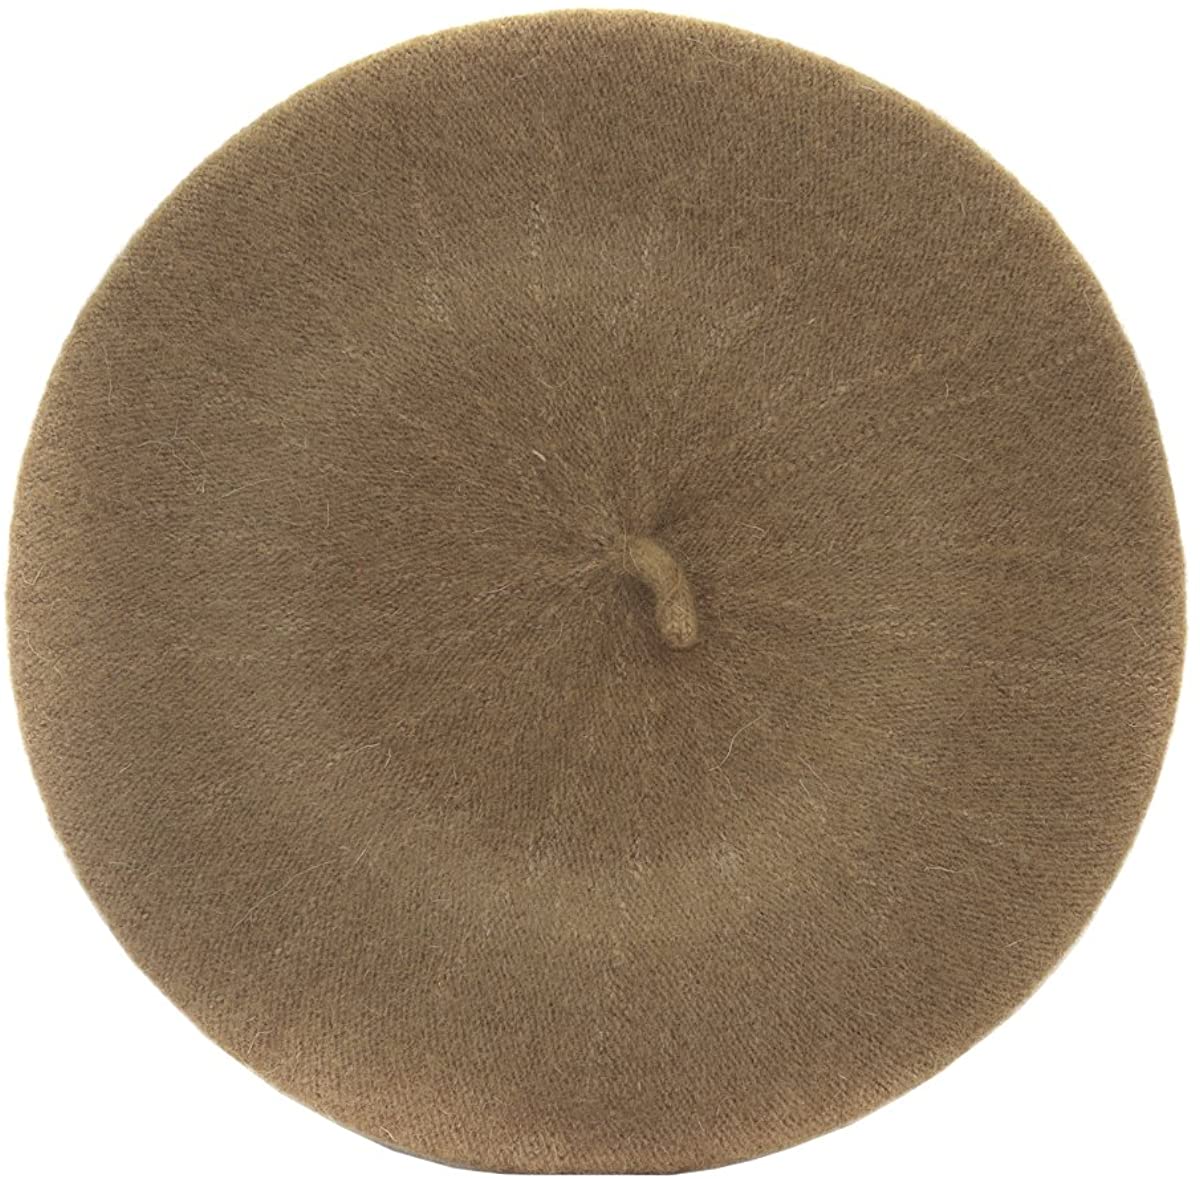 Unisex French Style 100% Wool Beret Hats